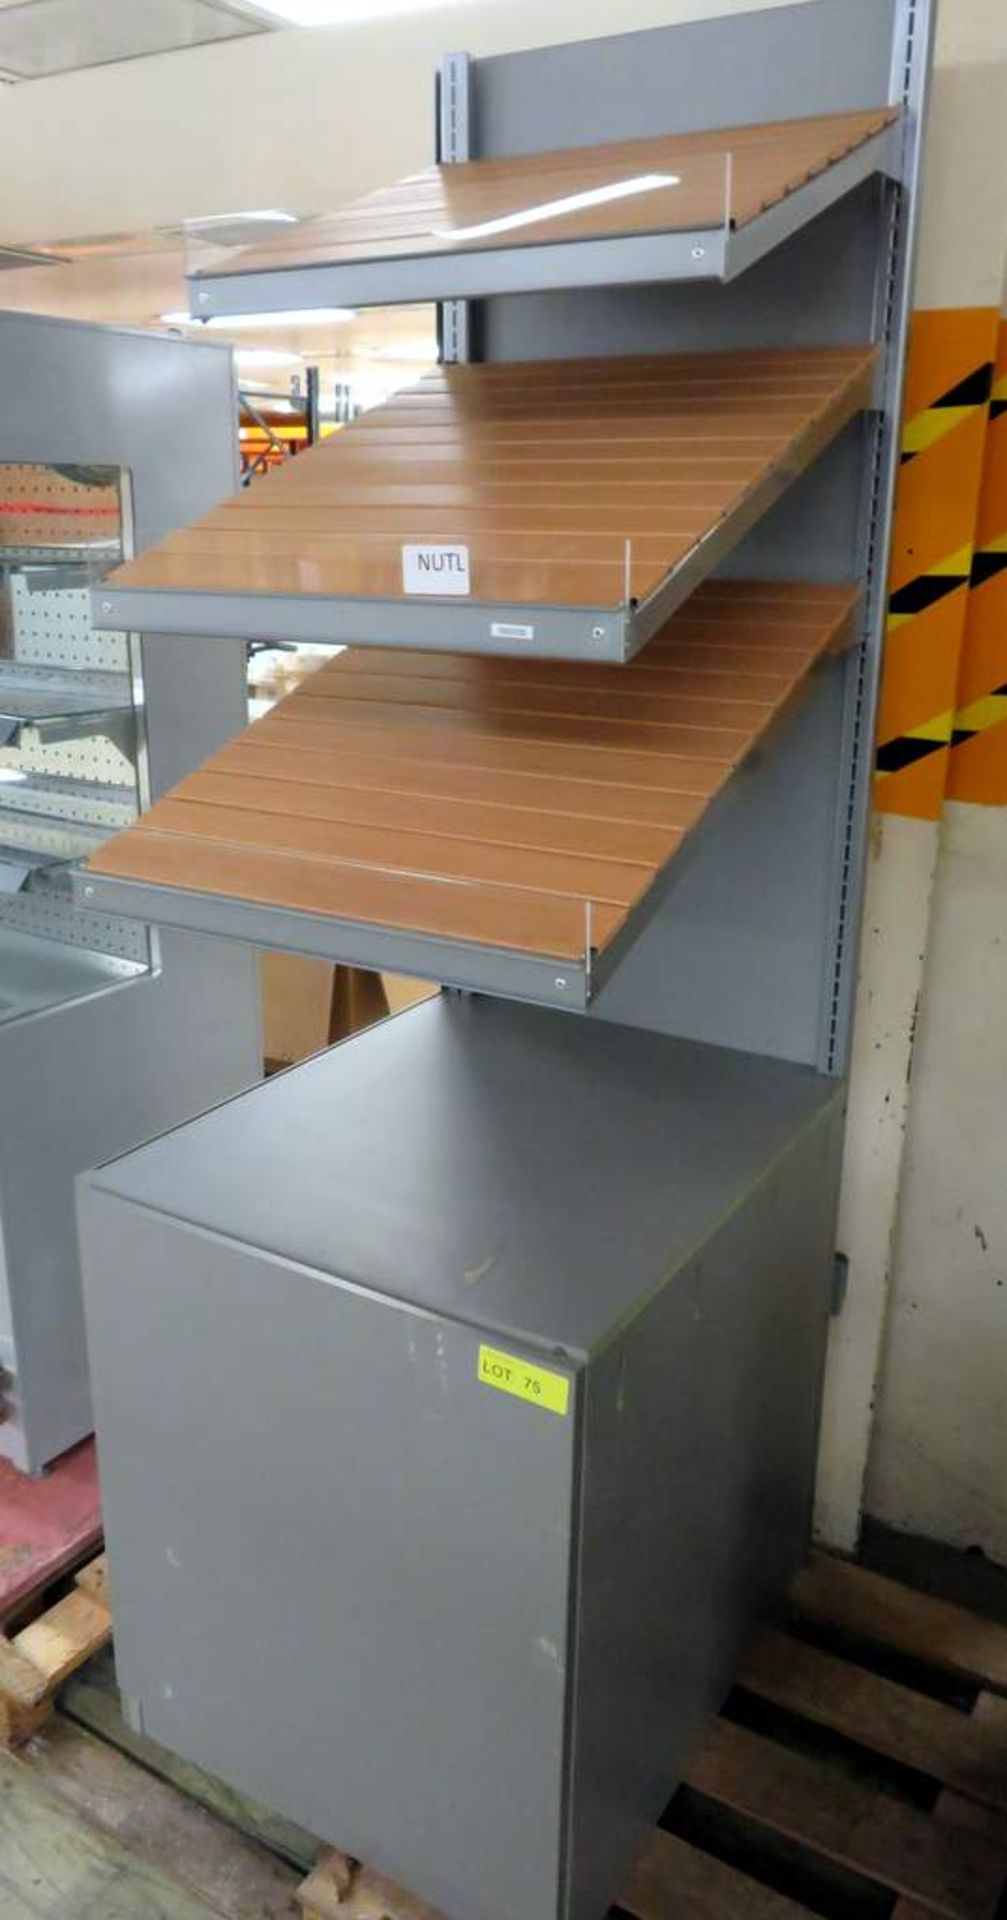 Product display cabinet with under counter cupboard - Image 2 of 4